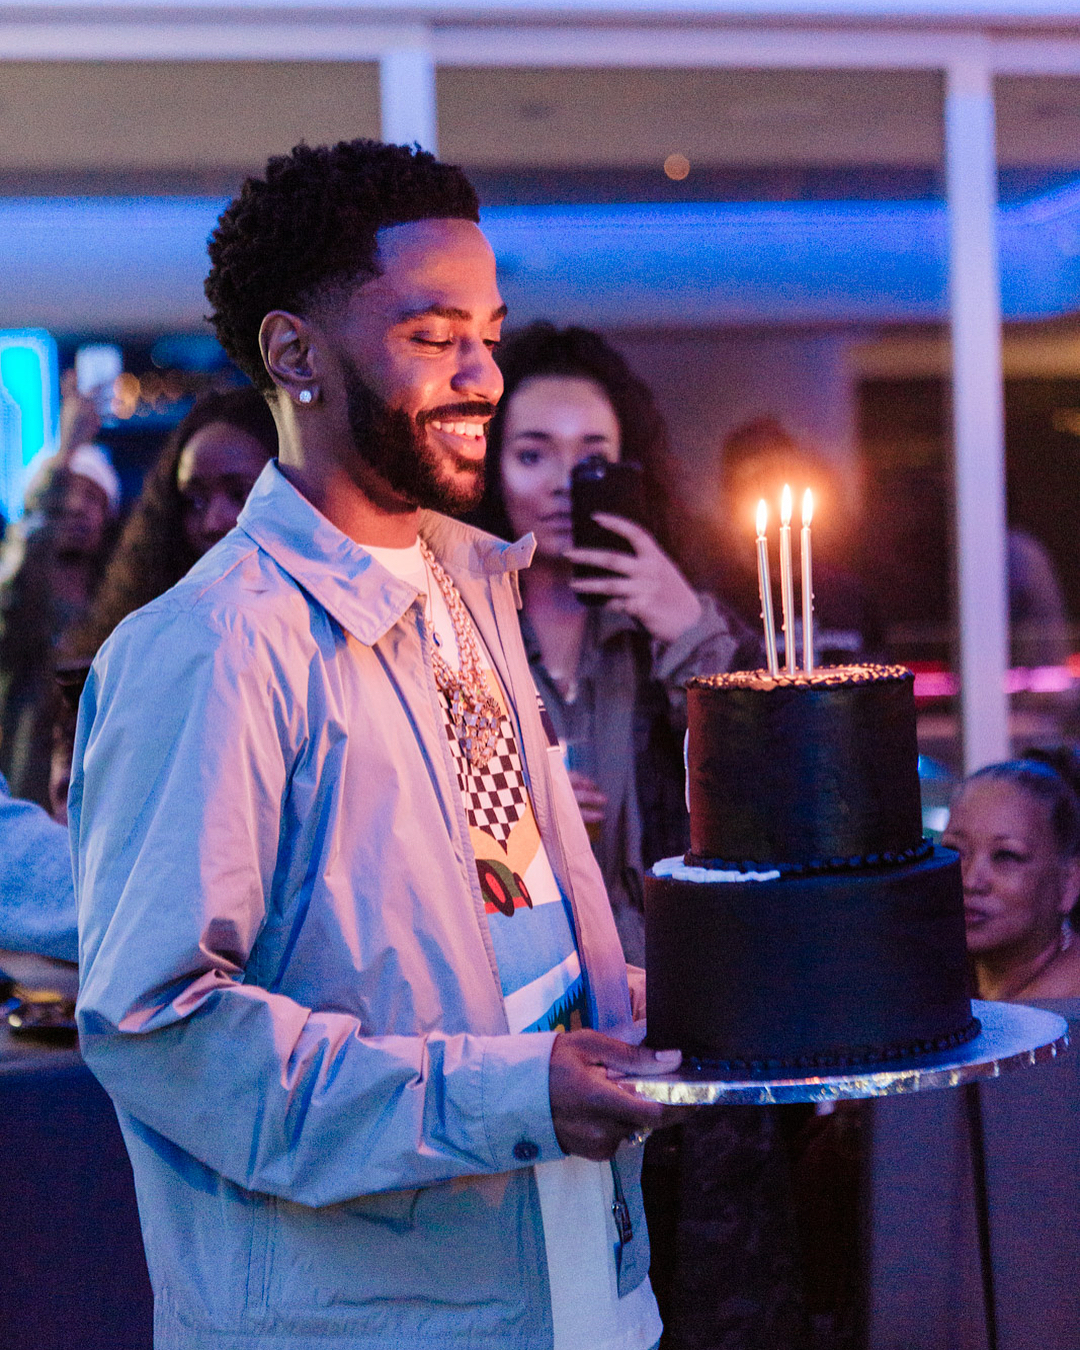 SPOTTED: Big Sean Continues His Birthday Celebrations in Prada